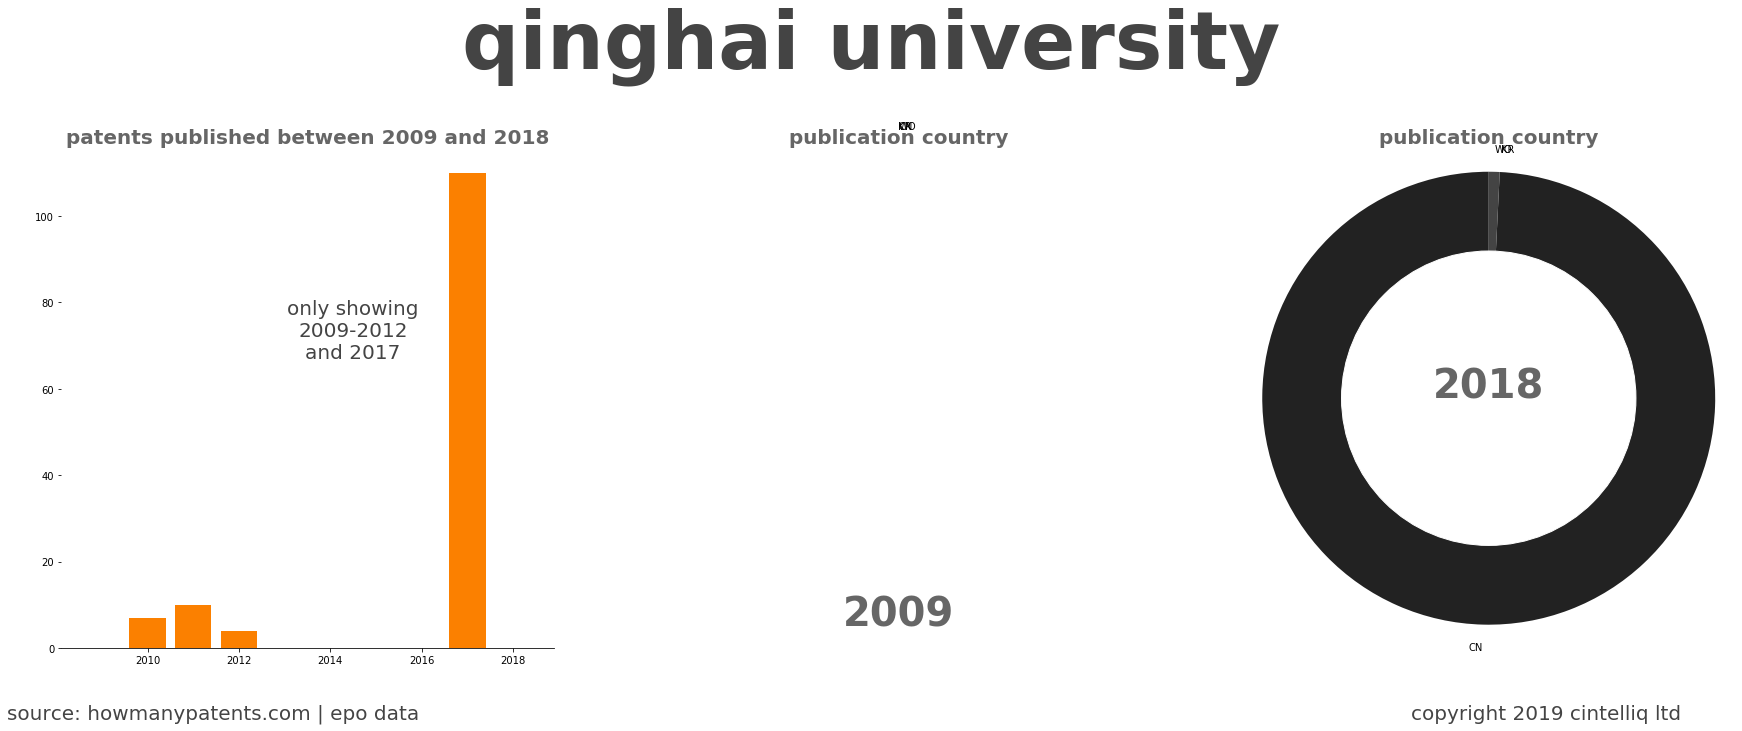 summary of patents for Qinghai University